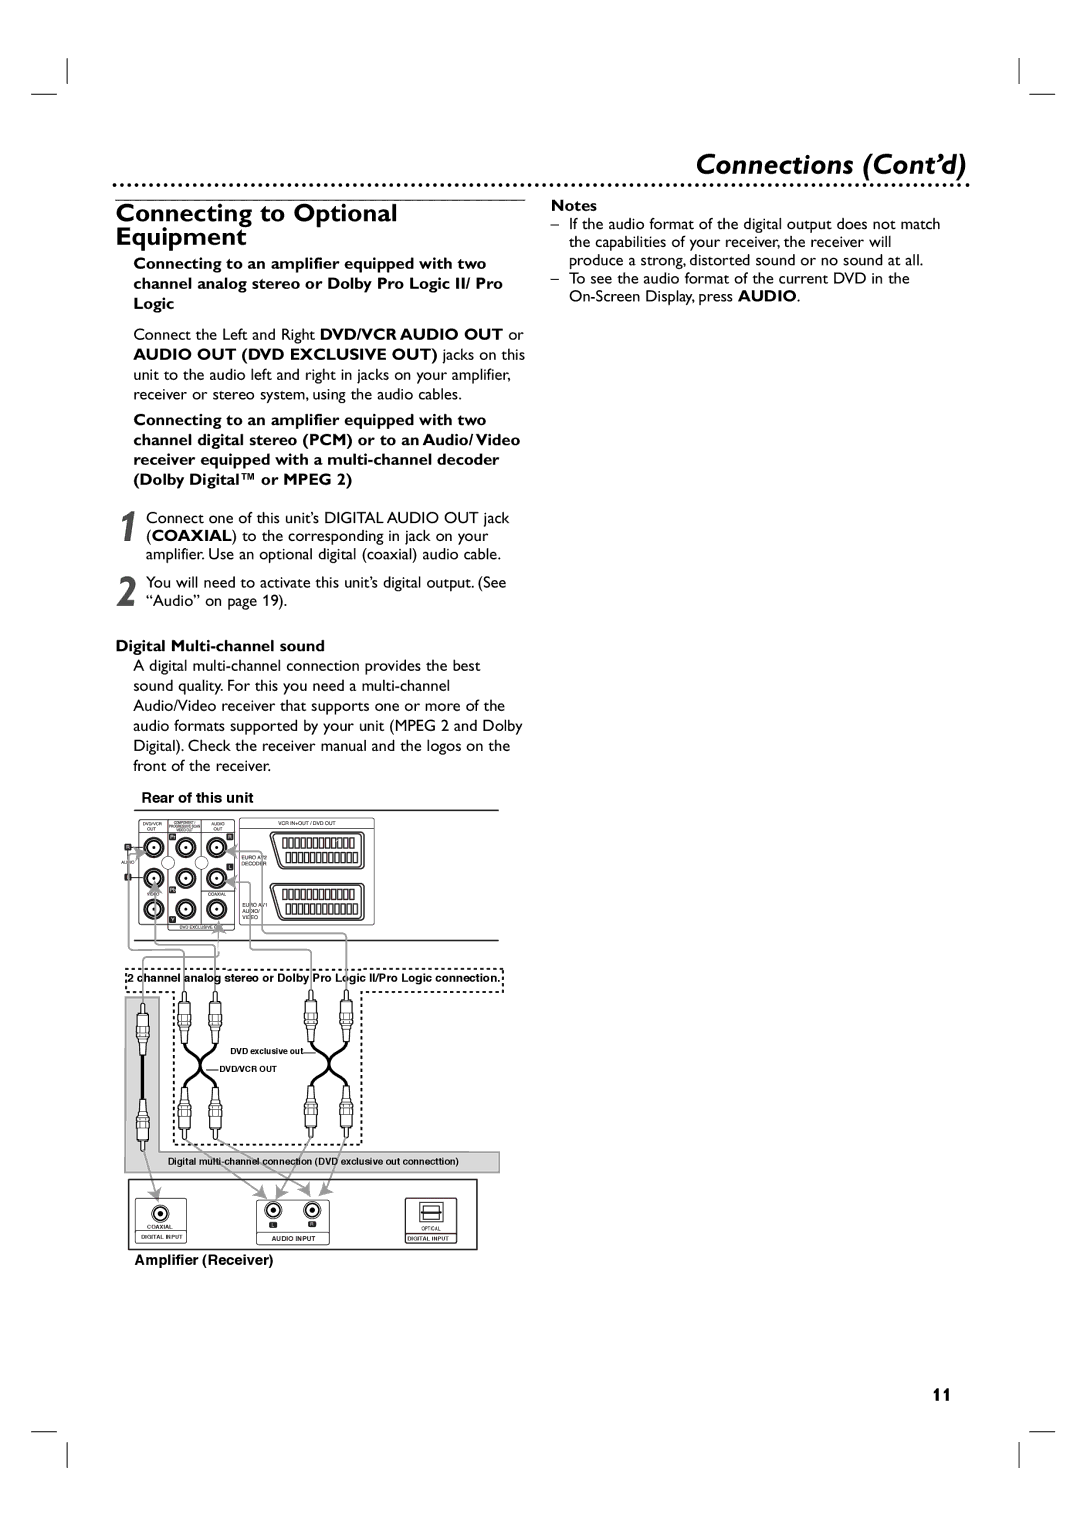 Philips DVP3350V/05 user manual Connections Cont’d, Connecting to Optional Equipment, Digital Multi-channel sound 